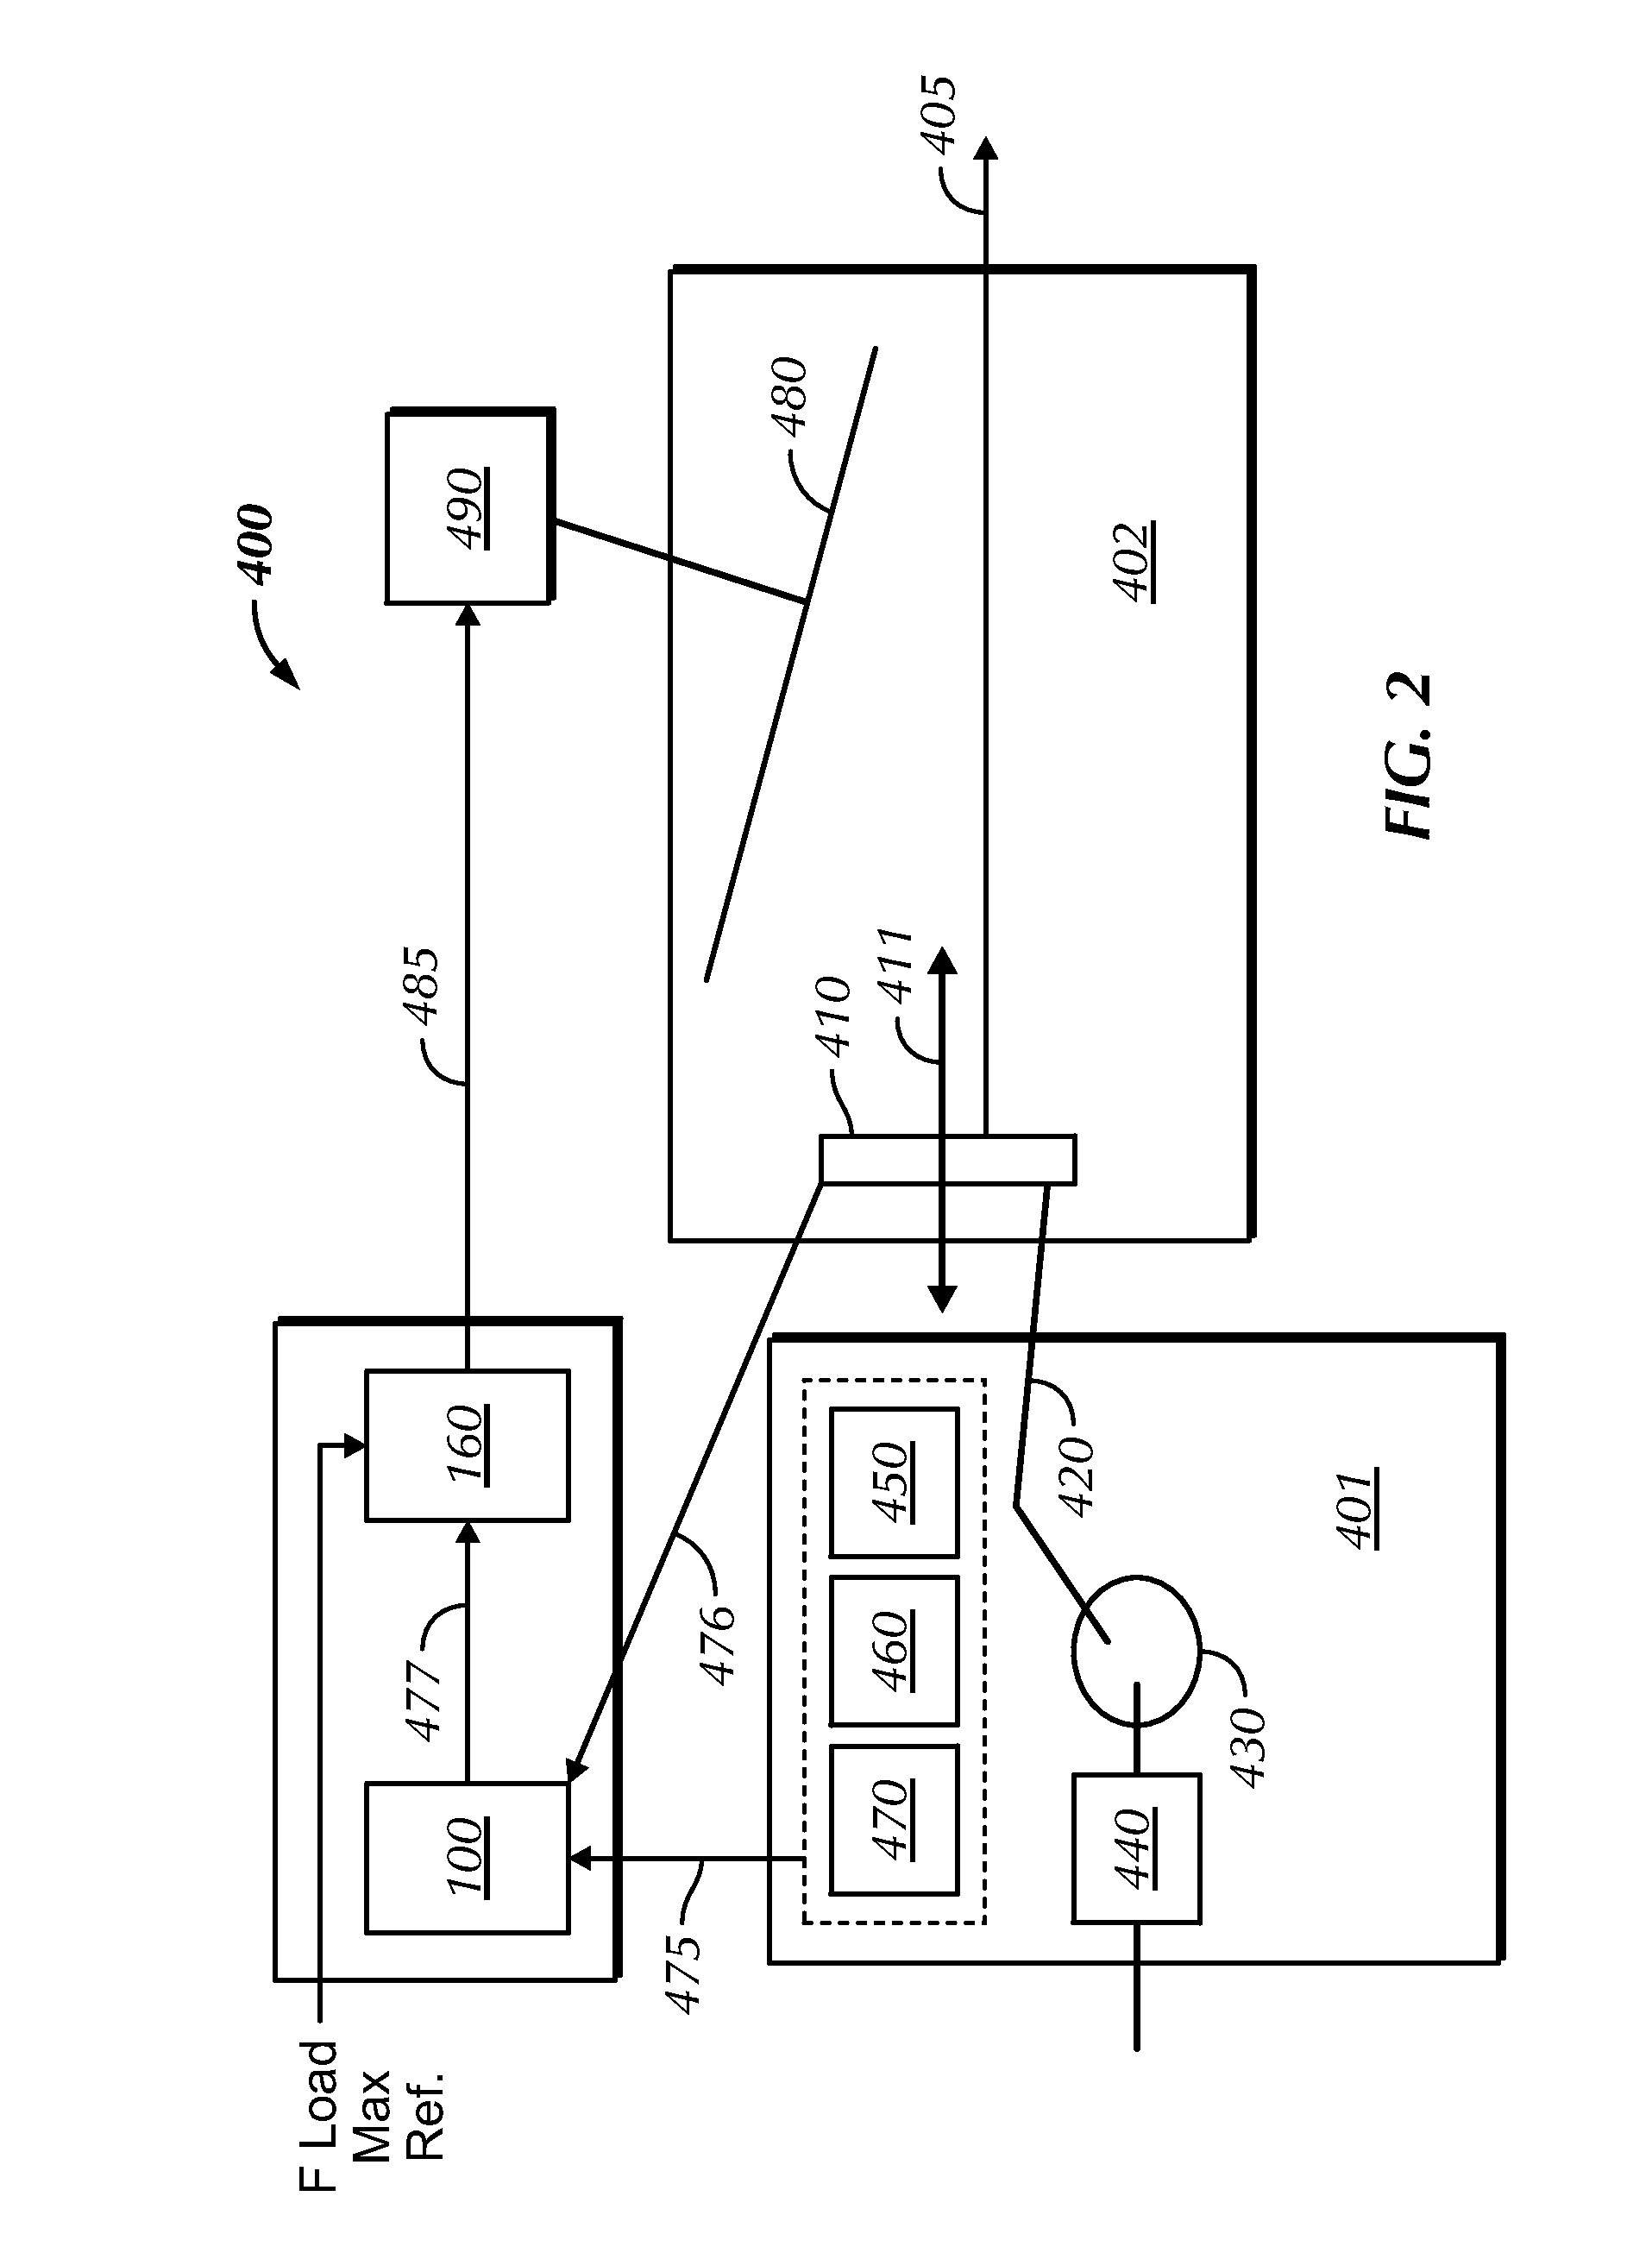 Method and system for determining the load on an element of the drive system of a plunger in a baler